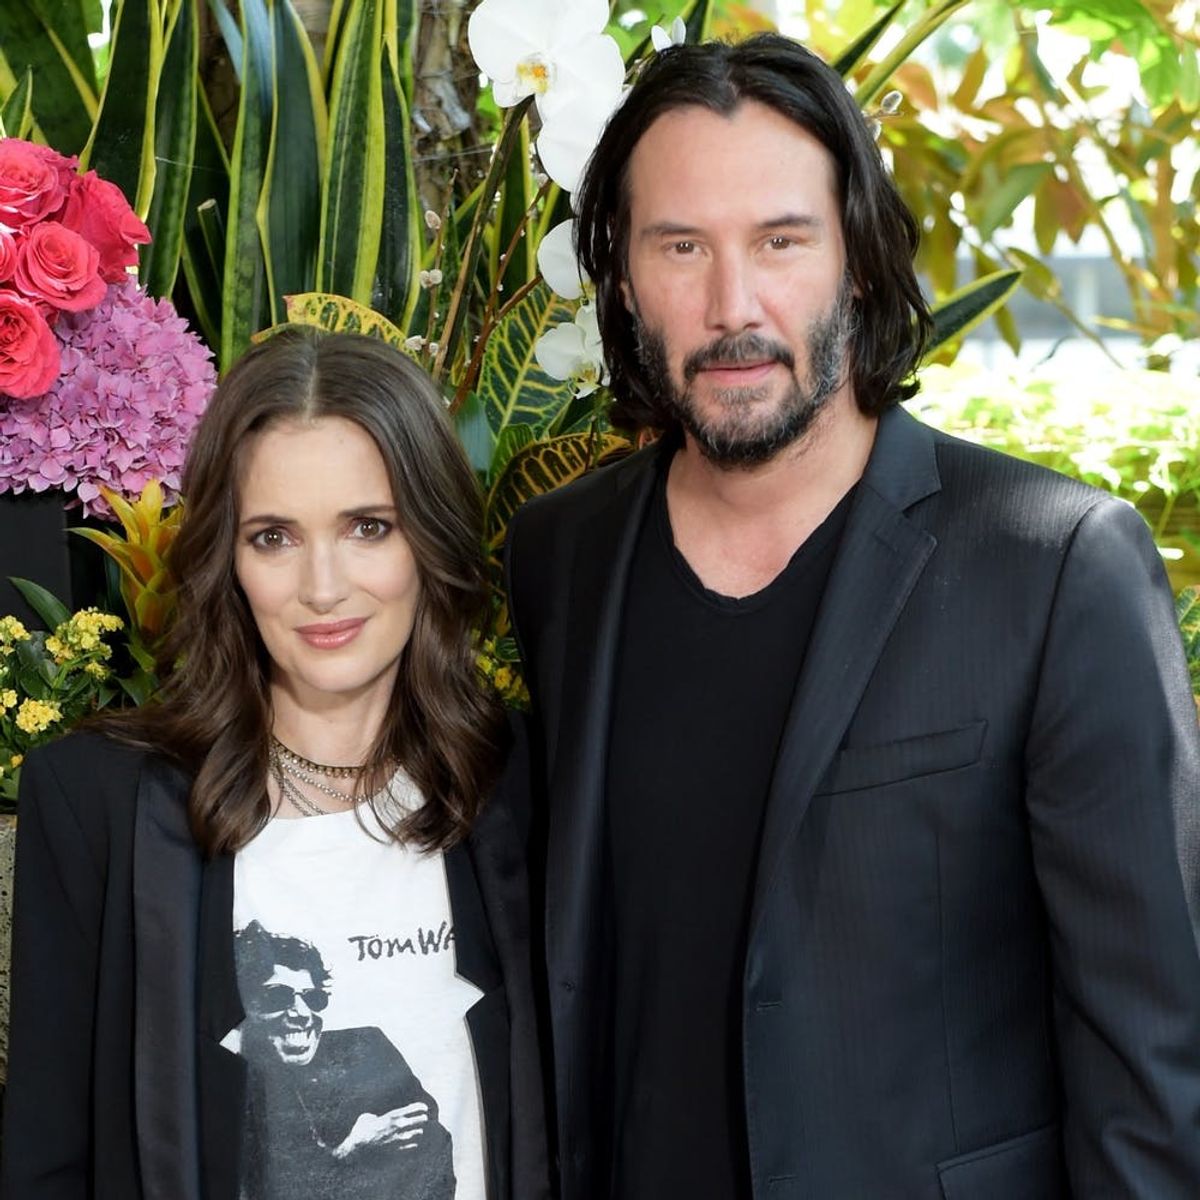 Winona Ryder and Keanu Reeves Might Have Gotten Married While Filming a Movie in 1992